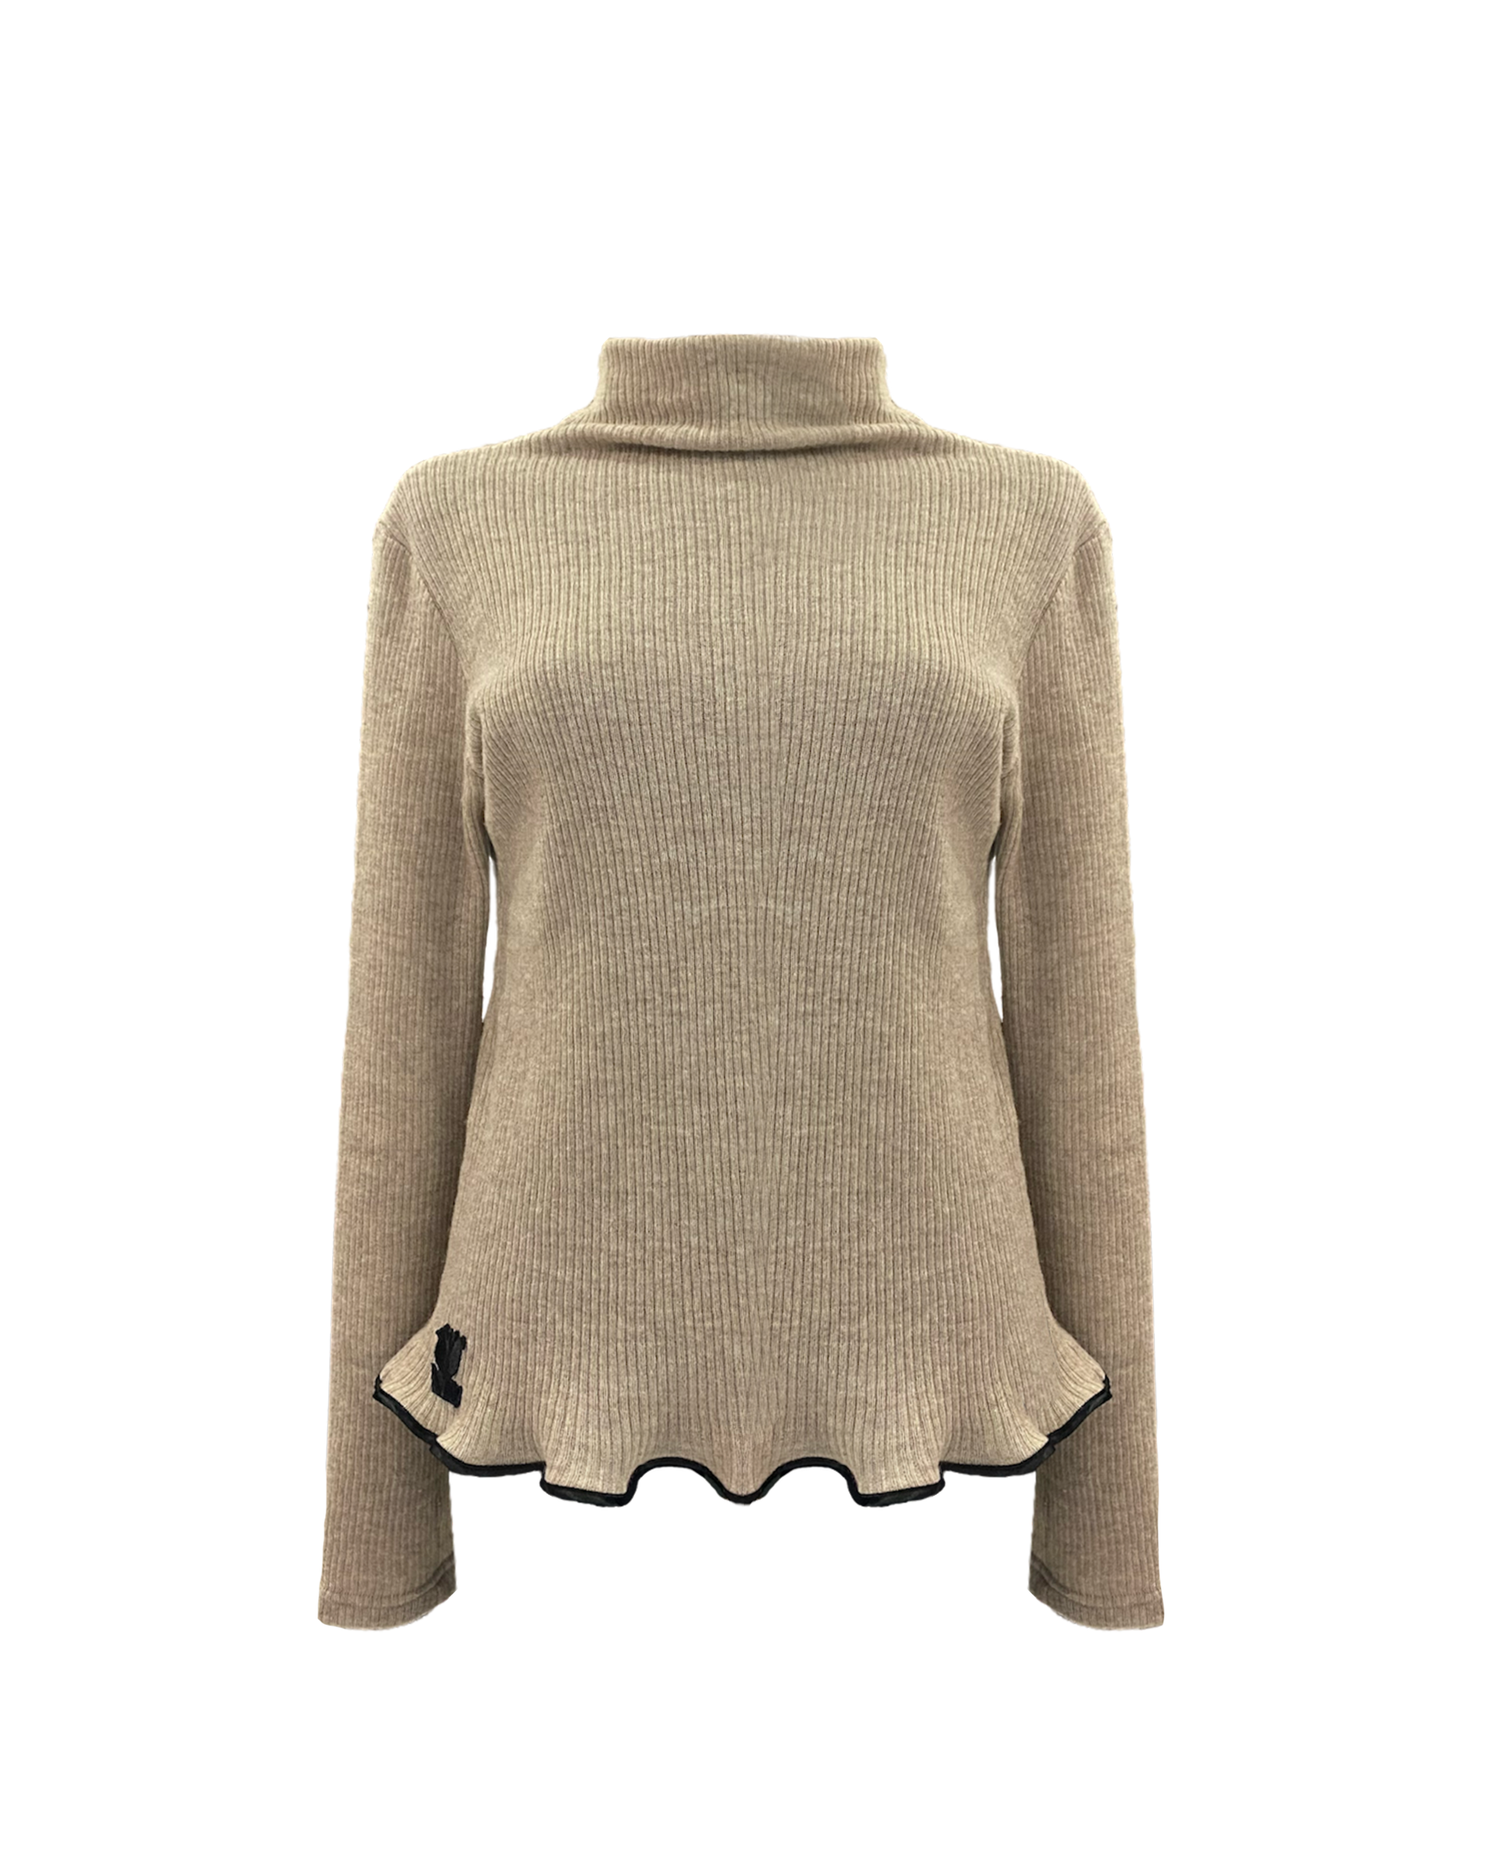 BEIGE LONG-SLEEVED TOP AW23/24